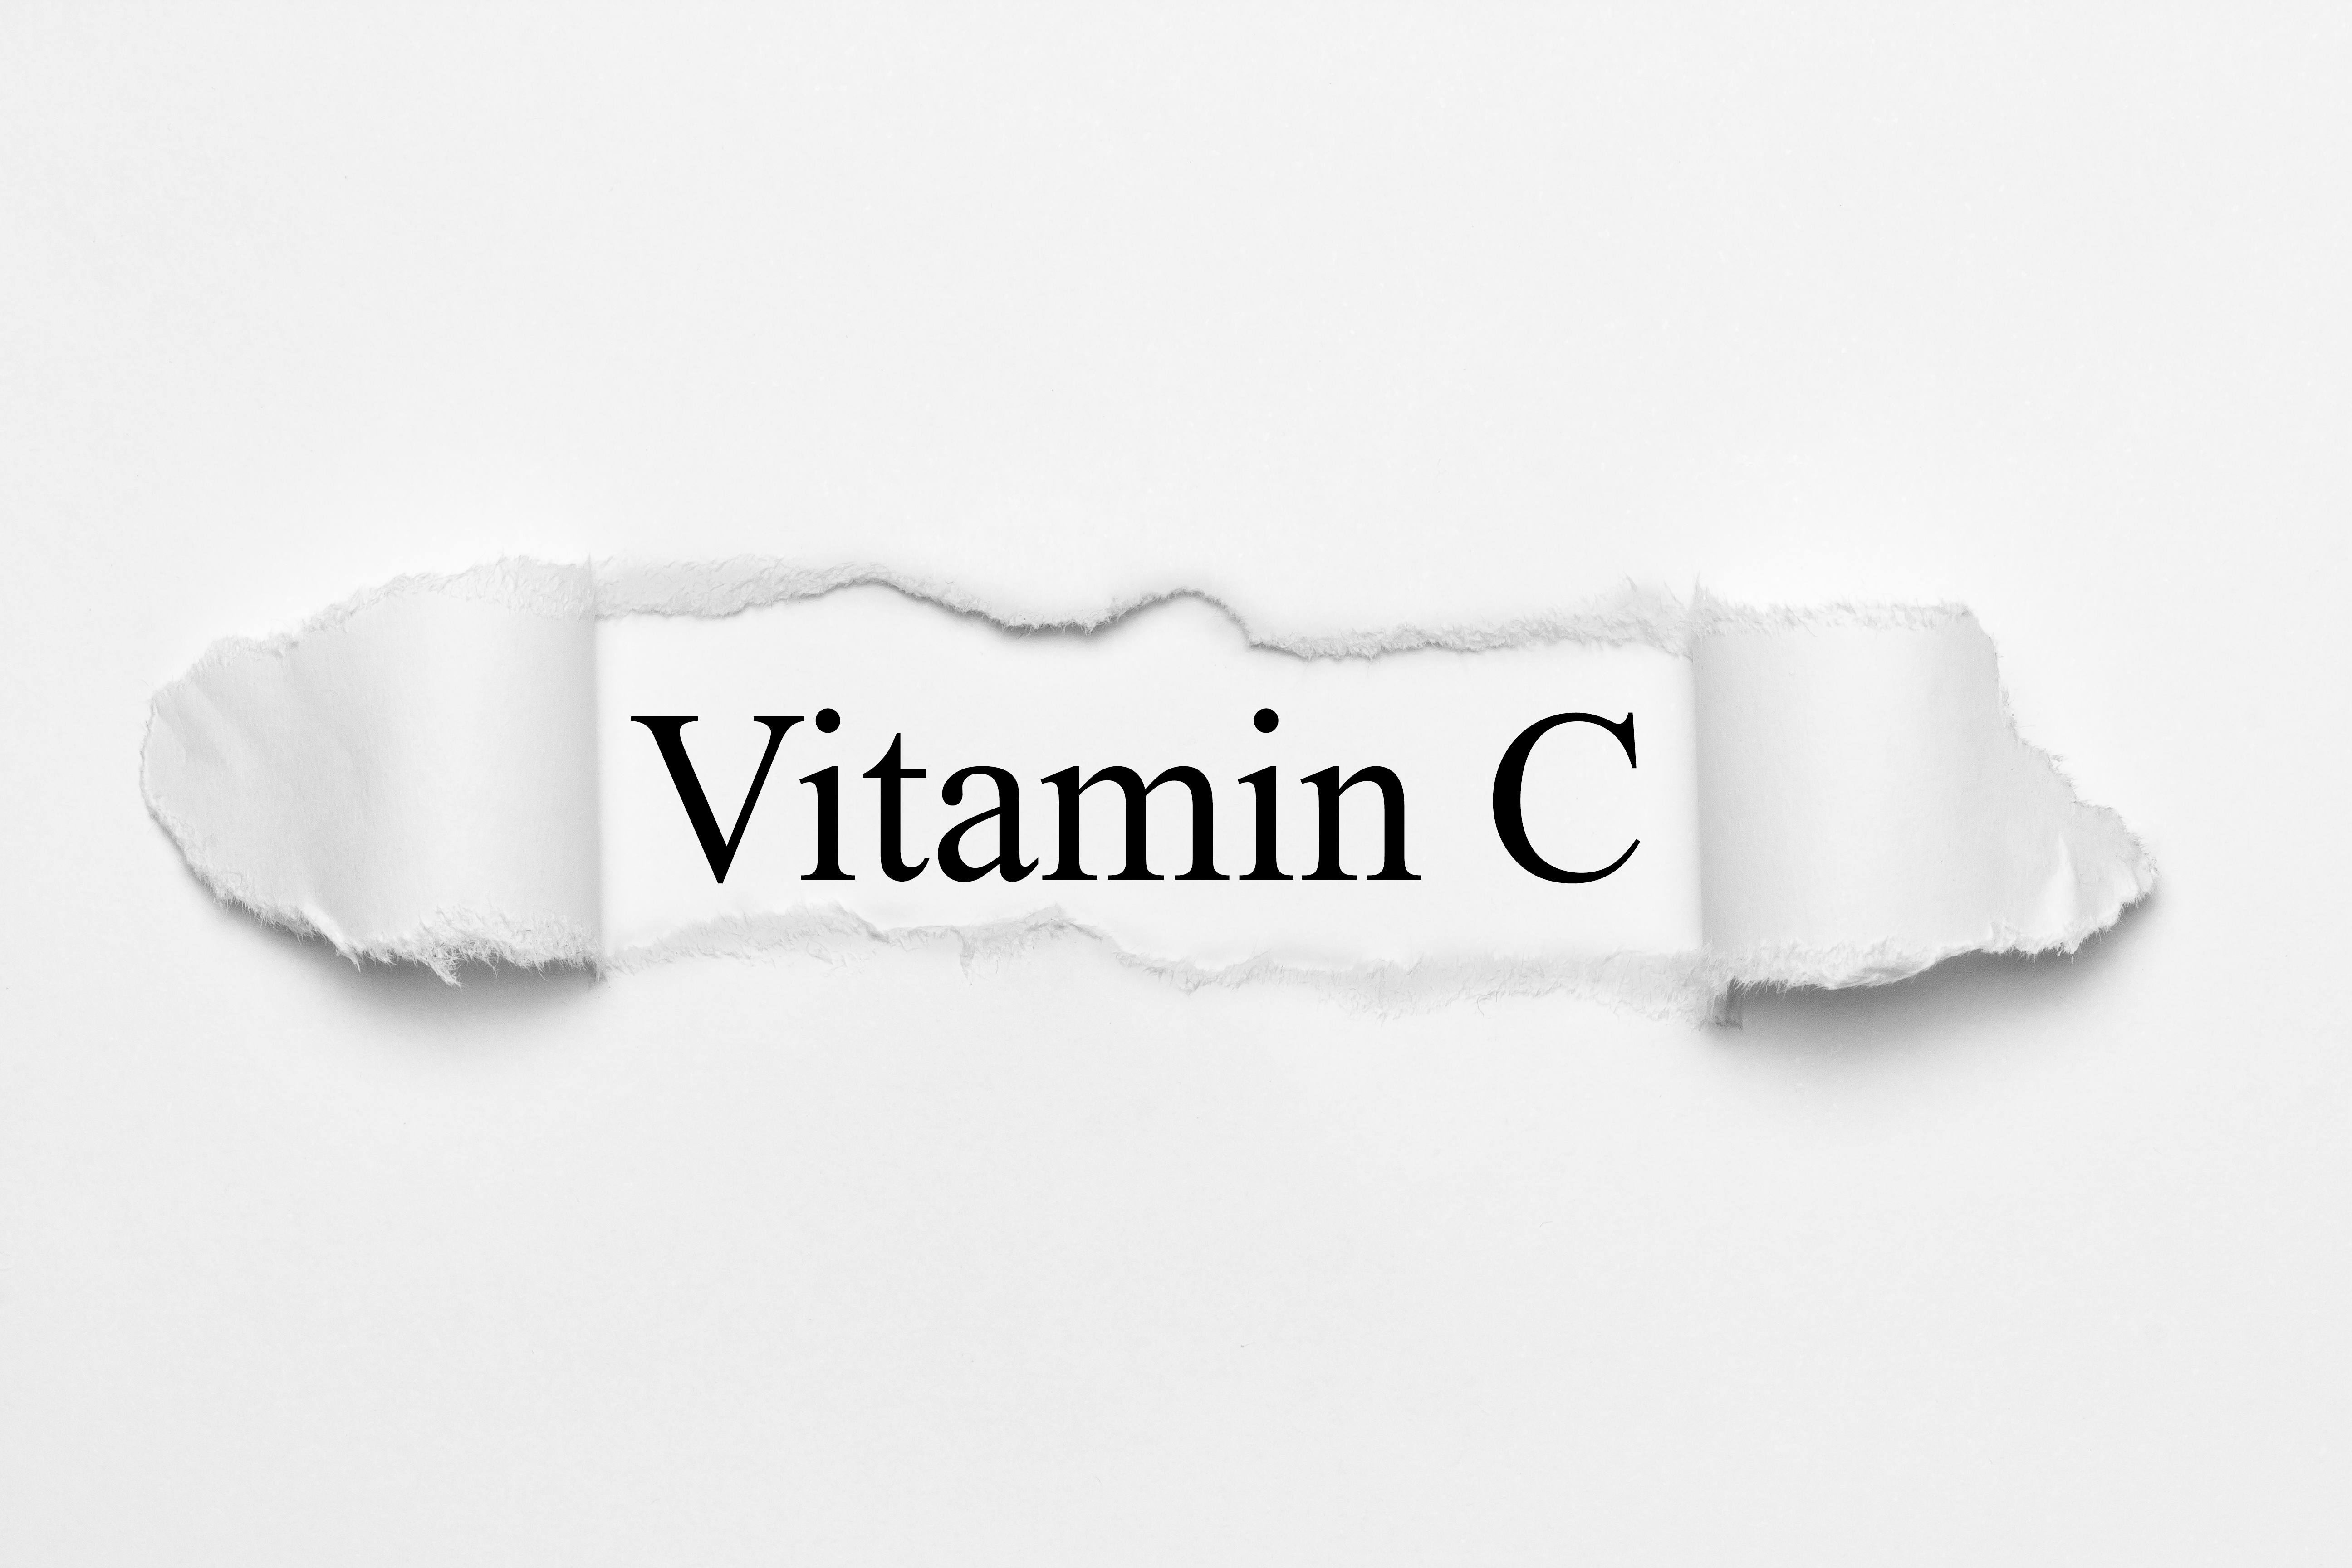 VITAMIN C: USING NATURE'S MIRACLE FOR WELL-BEING